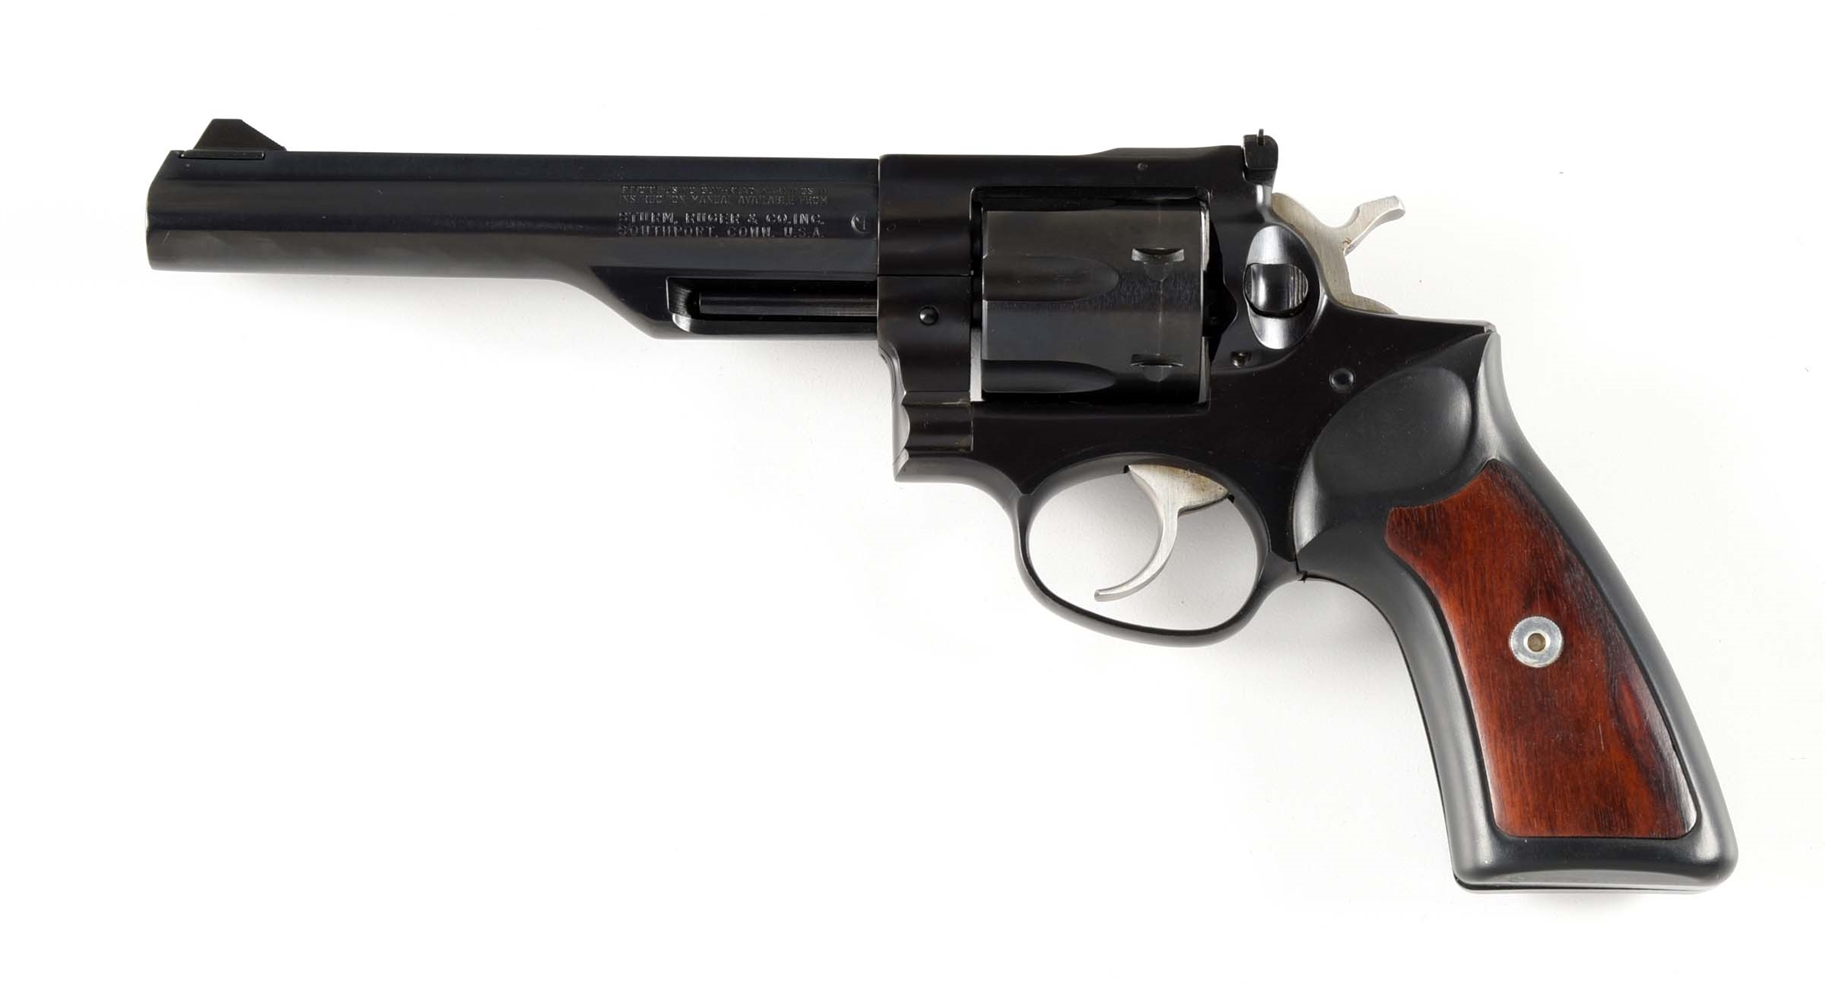 (M) RUGER GP100 DOUBLE ACTION .357 MAGNUM REVOLVER.